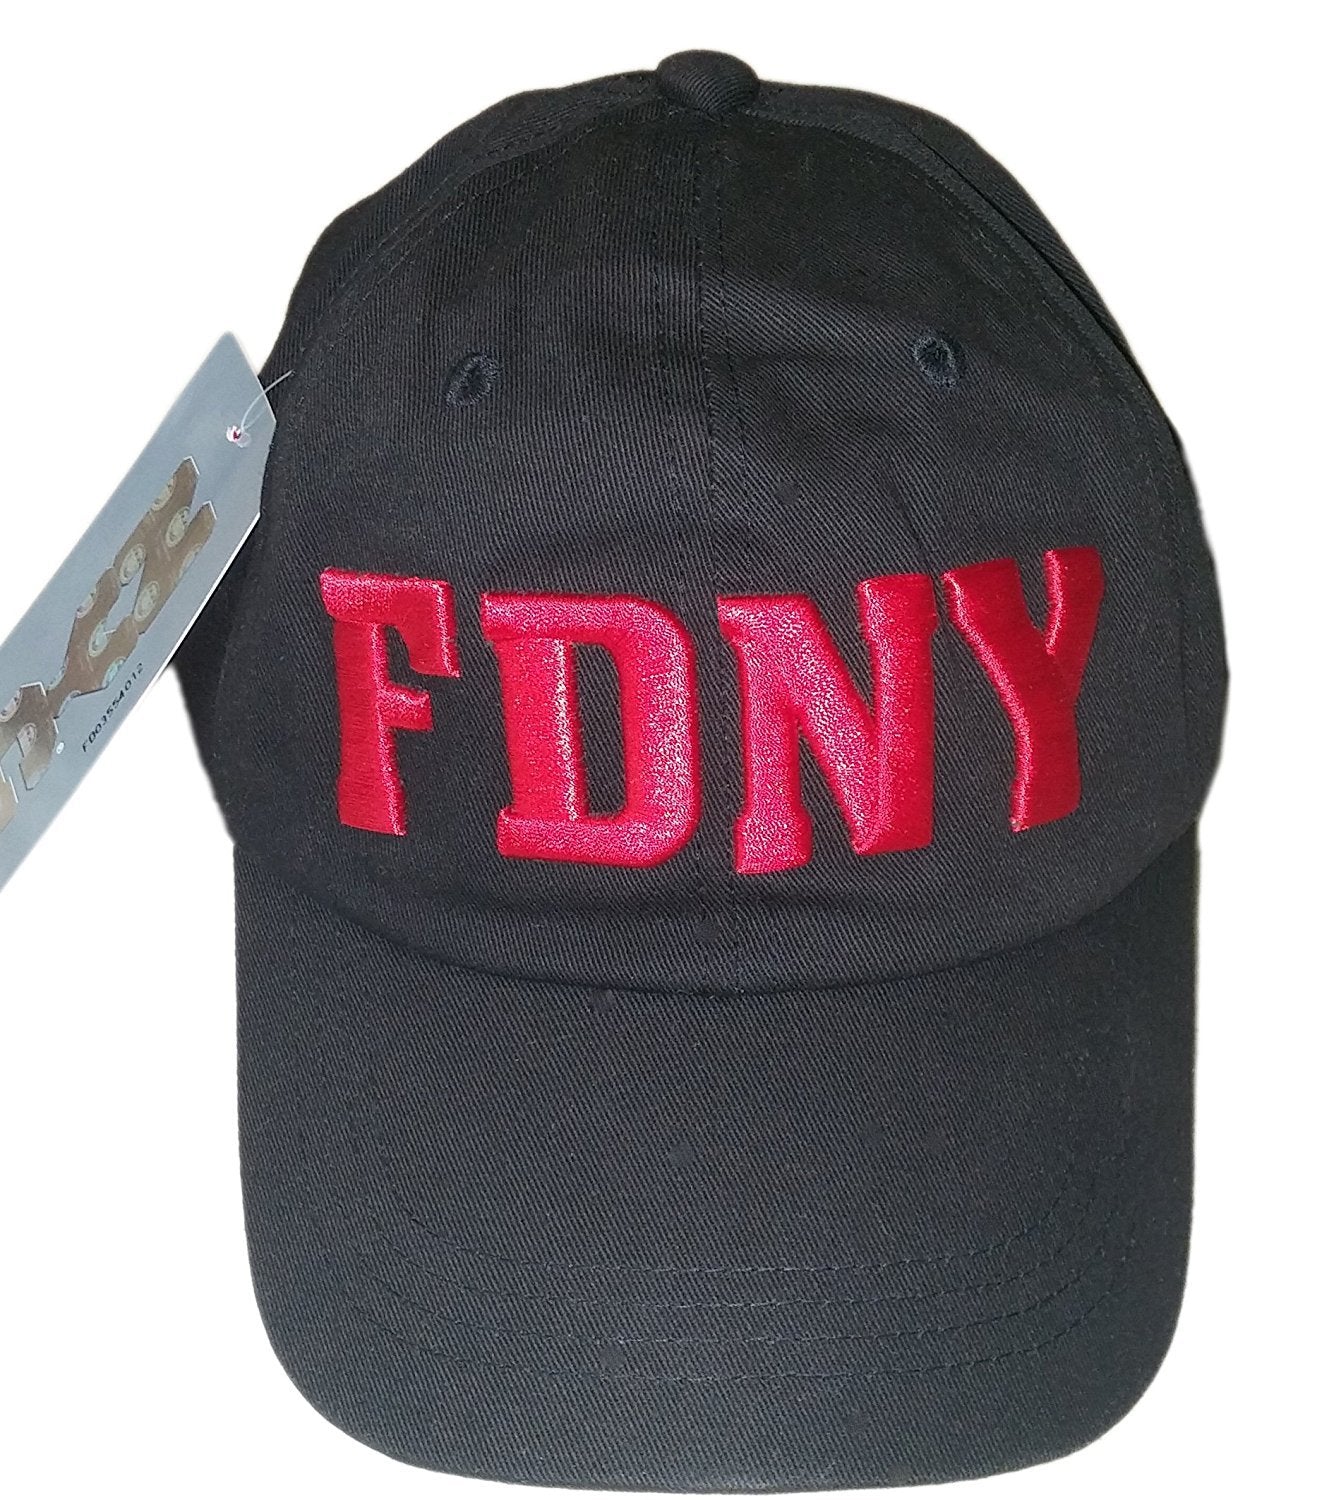 FDNY Baseball Hat Black Red 3d Embroidered Letters